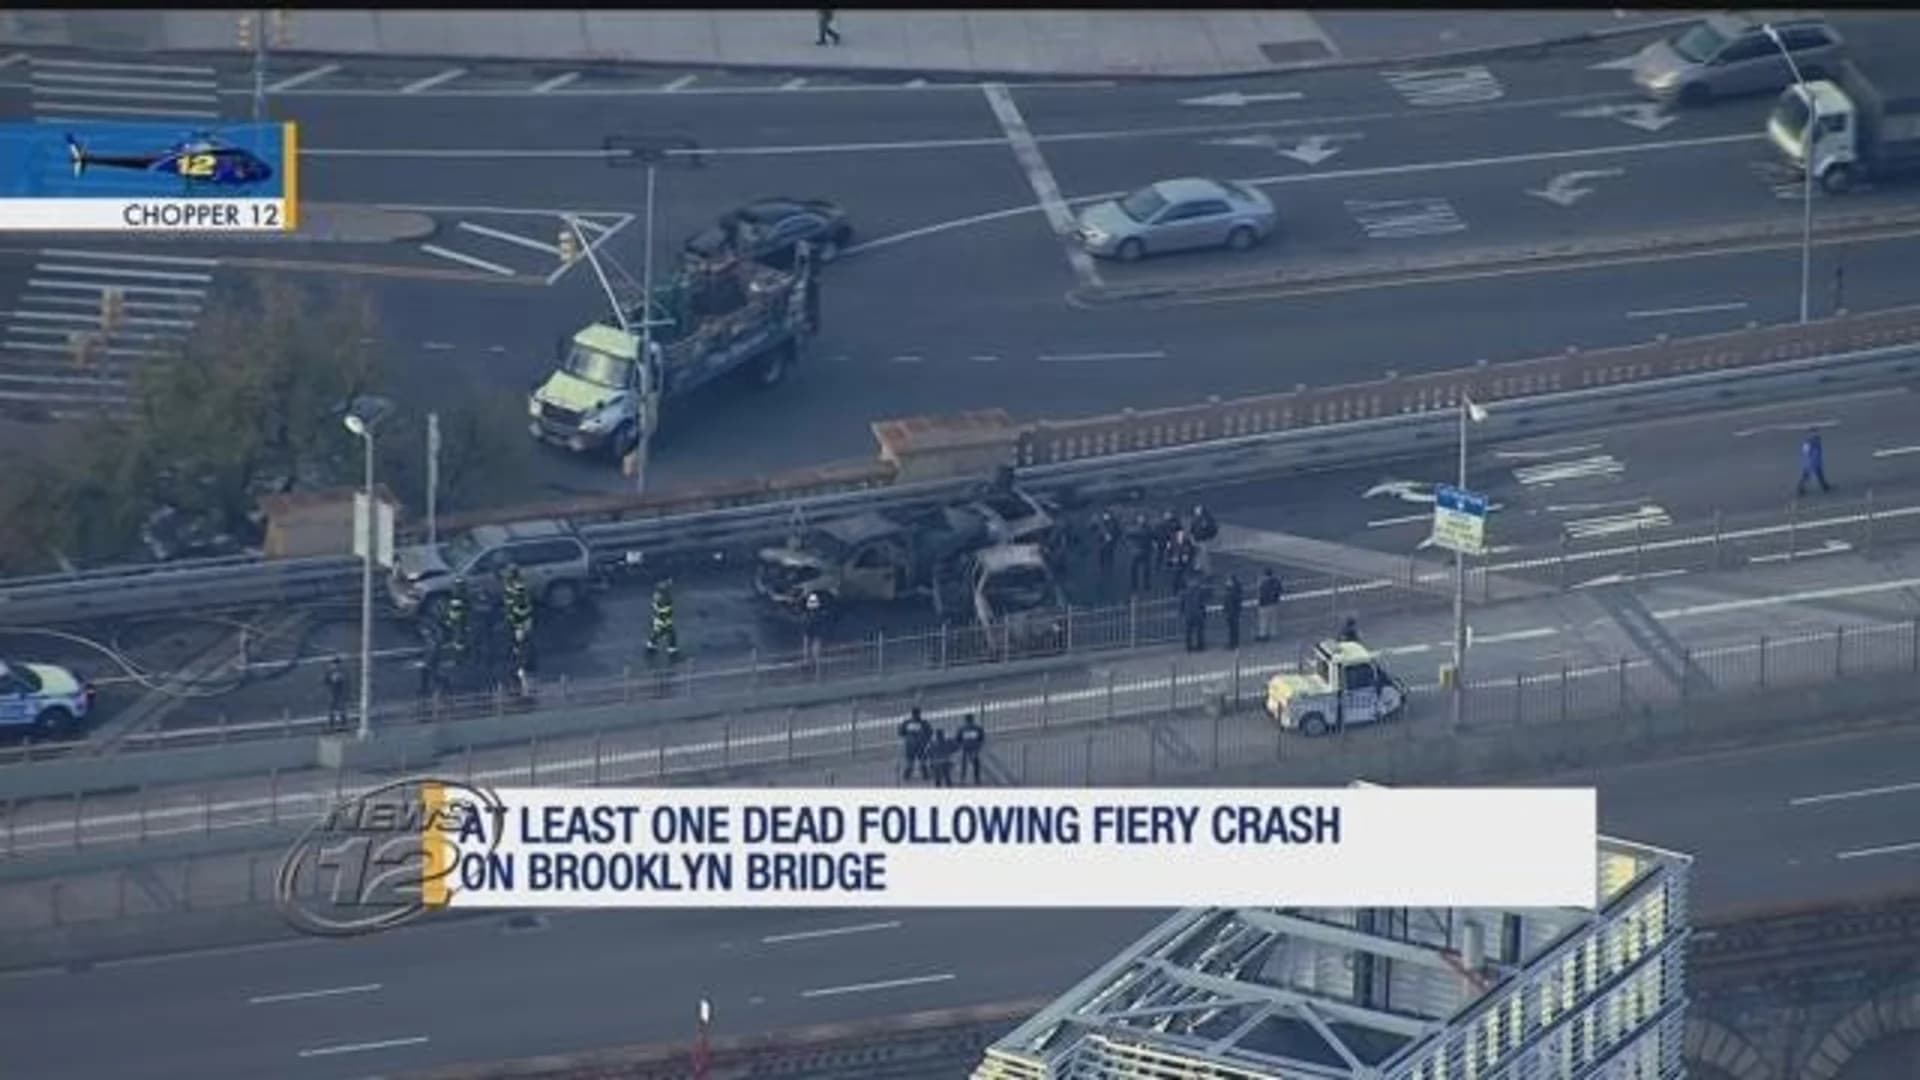 1 dead, others injured in 3-vehicle fire after Brooklyn Bridge crash